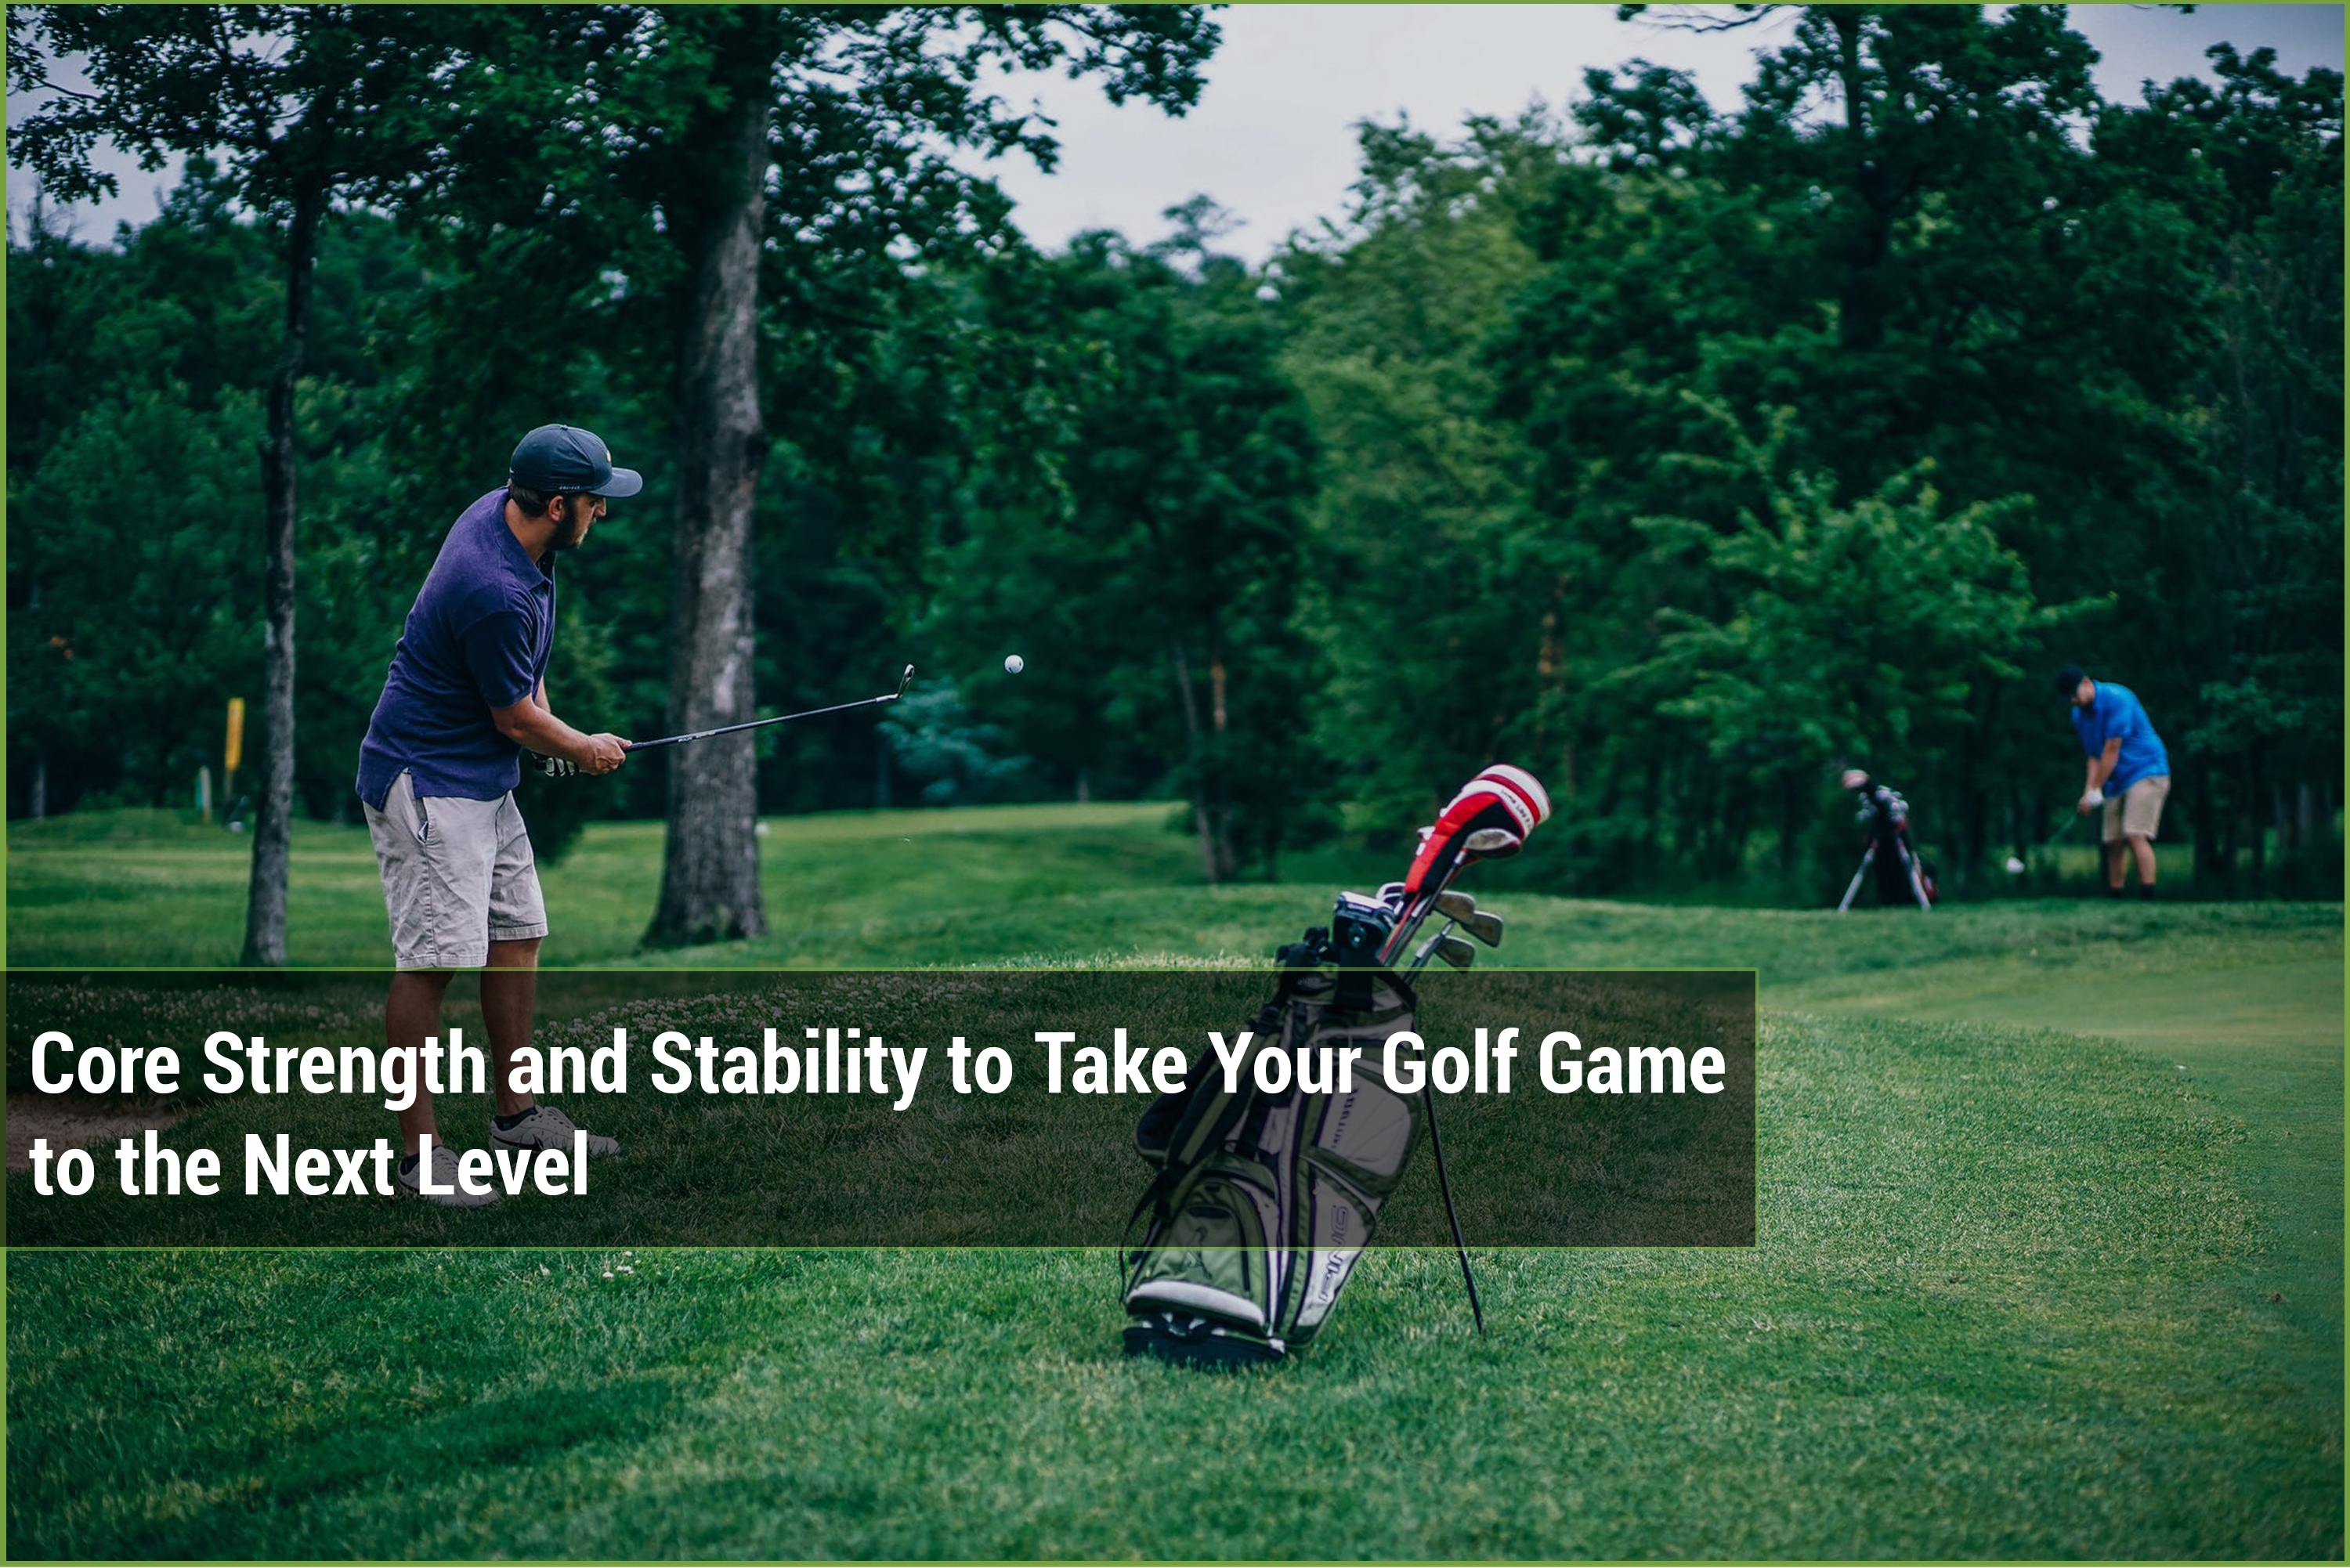 Core Strength and Stability to Take Your Golf Game to the Next Level